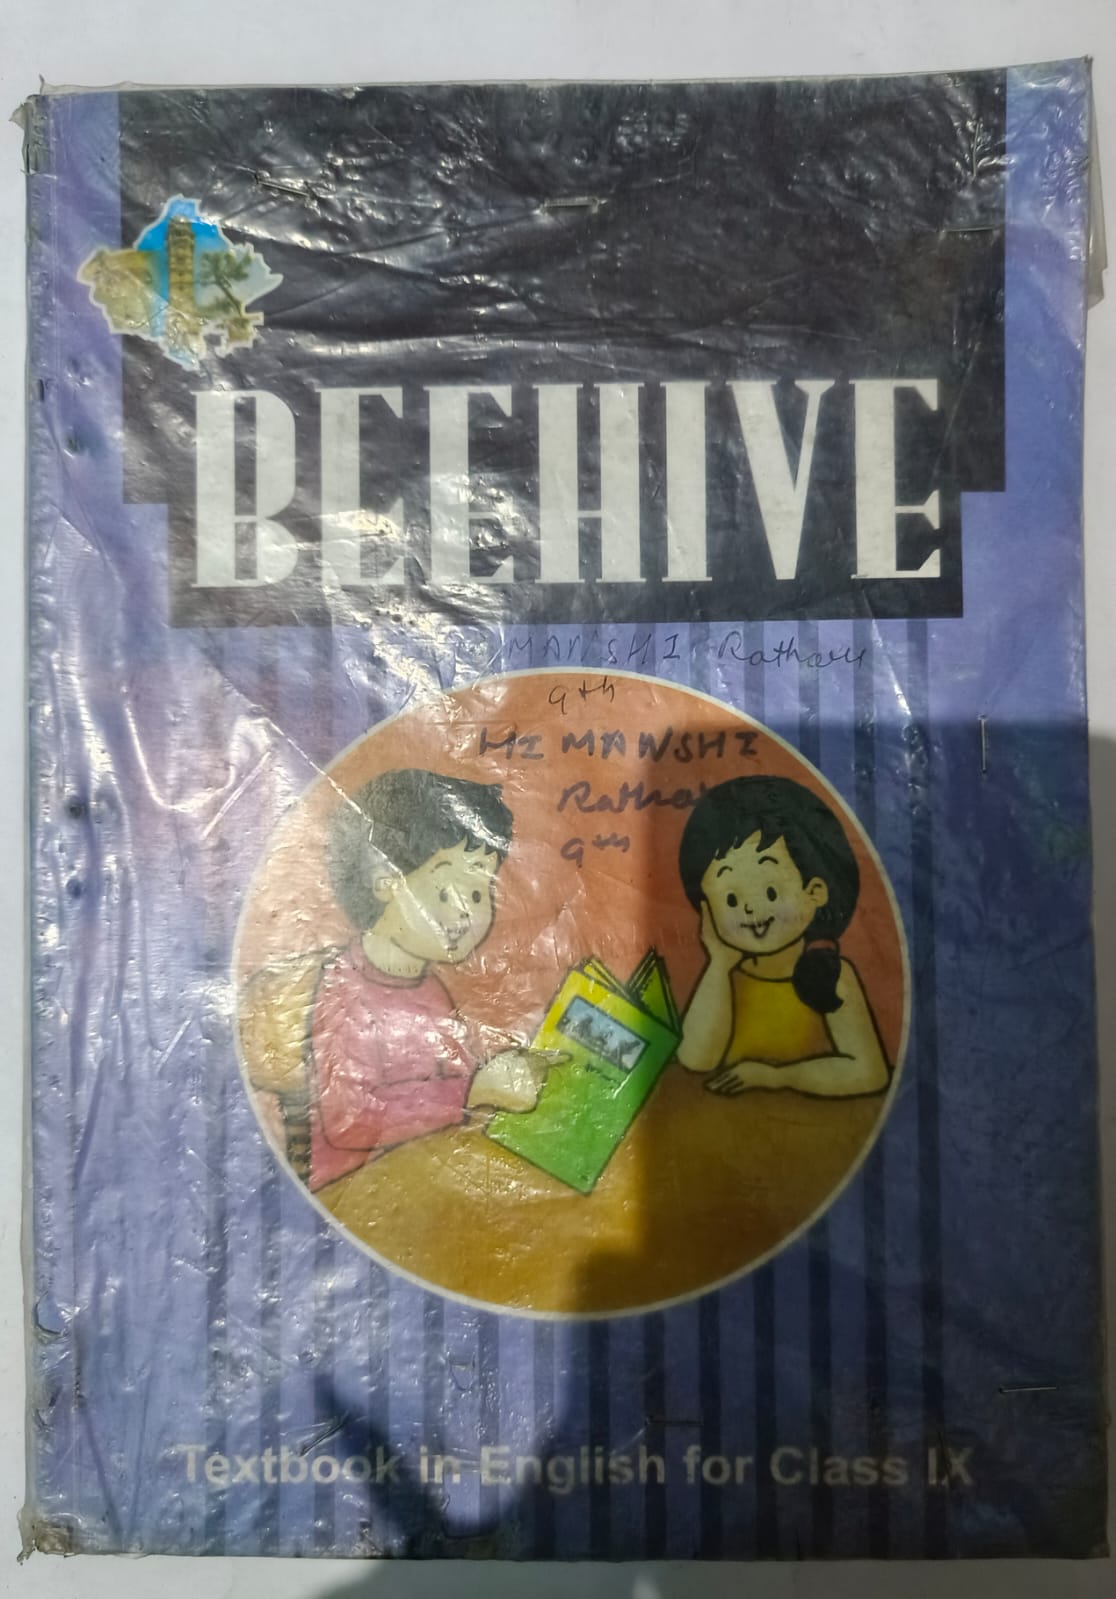 book review of beehive class 9